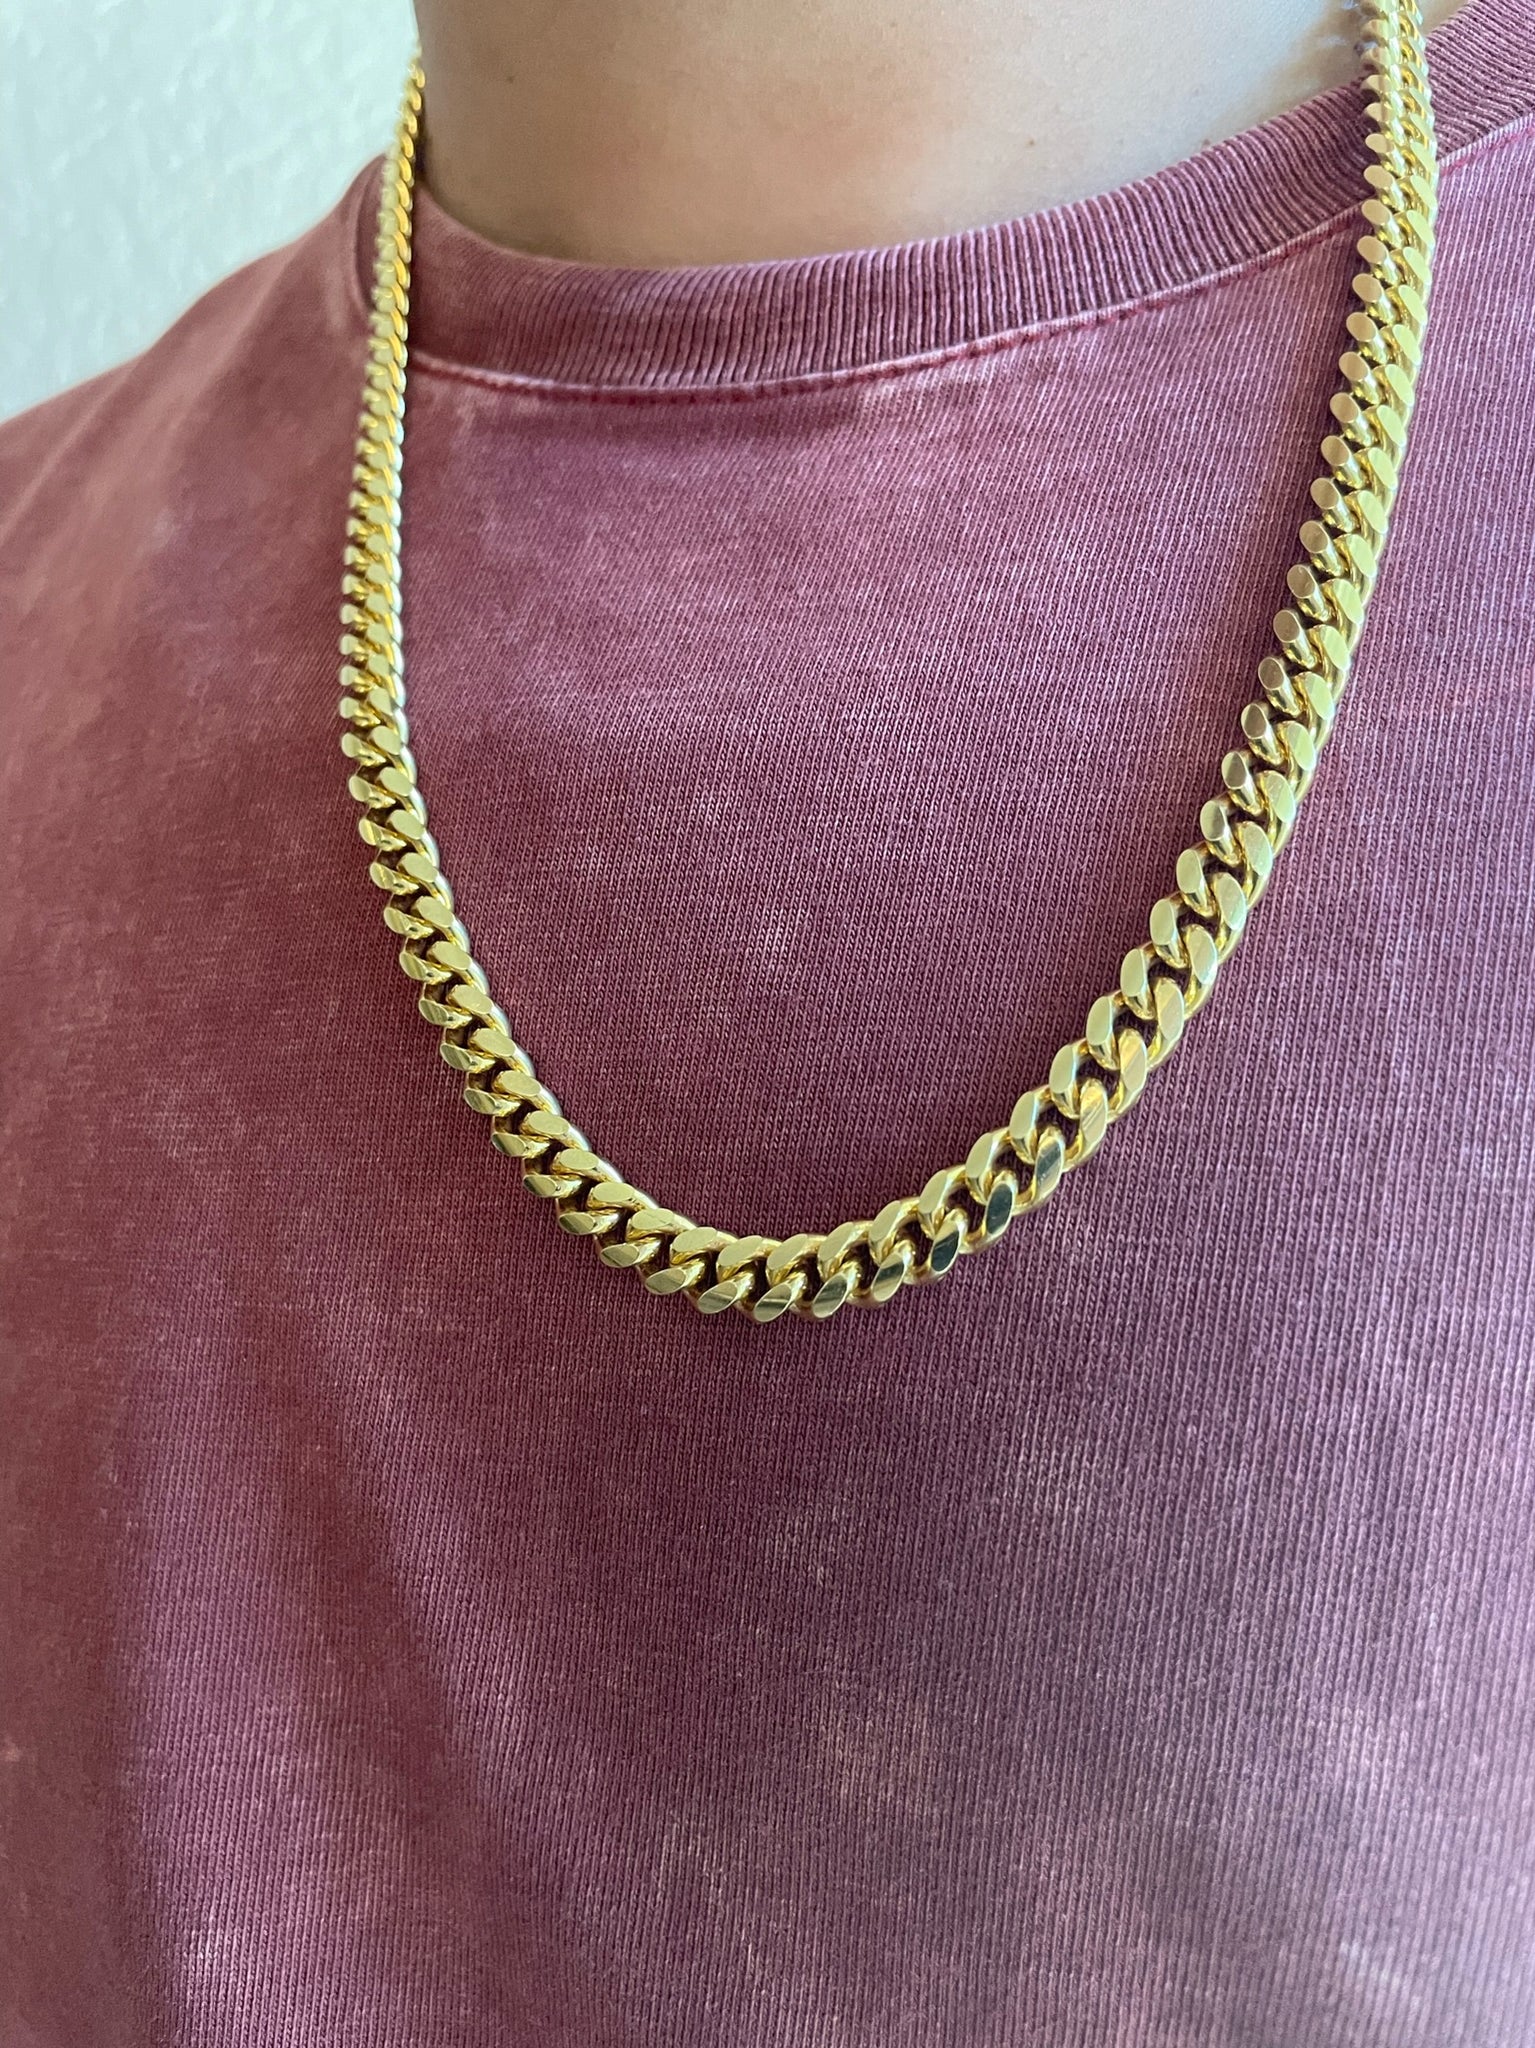 Are Cuban Link Chains in Style? Absolutely—Here's Why